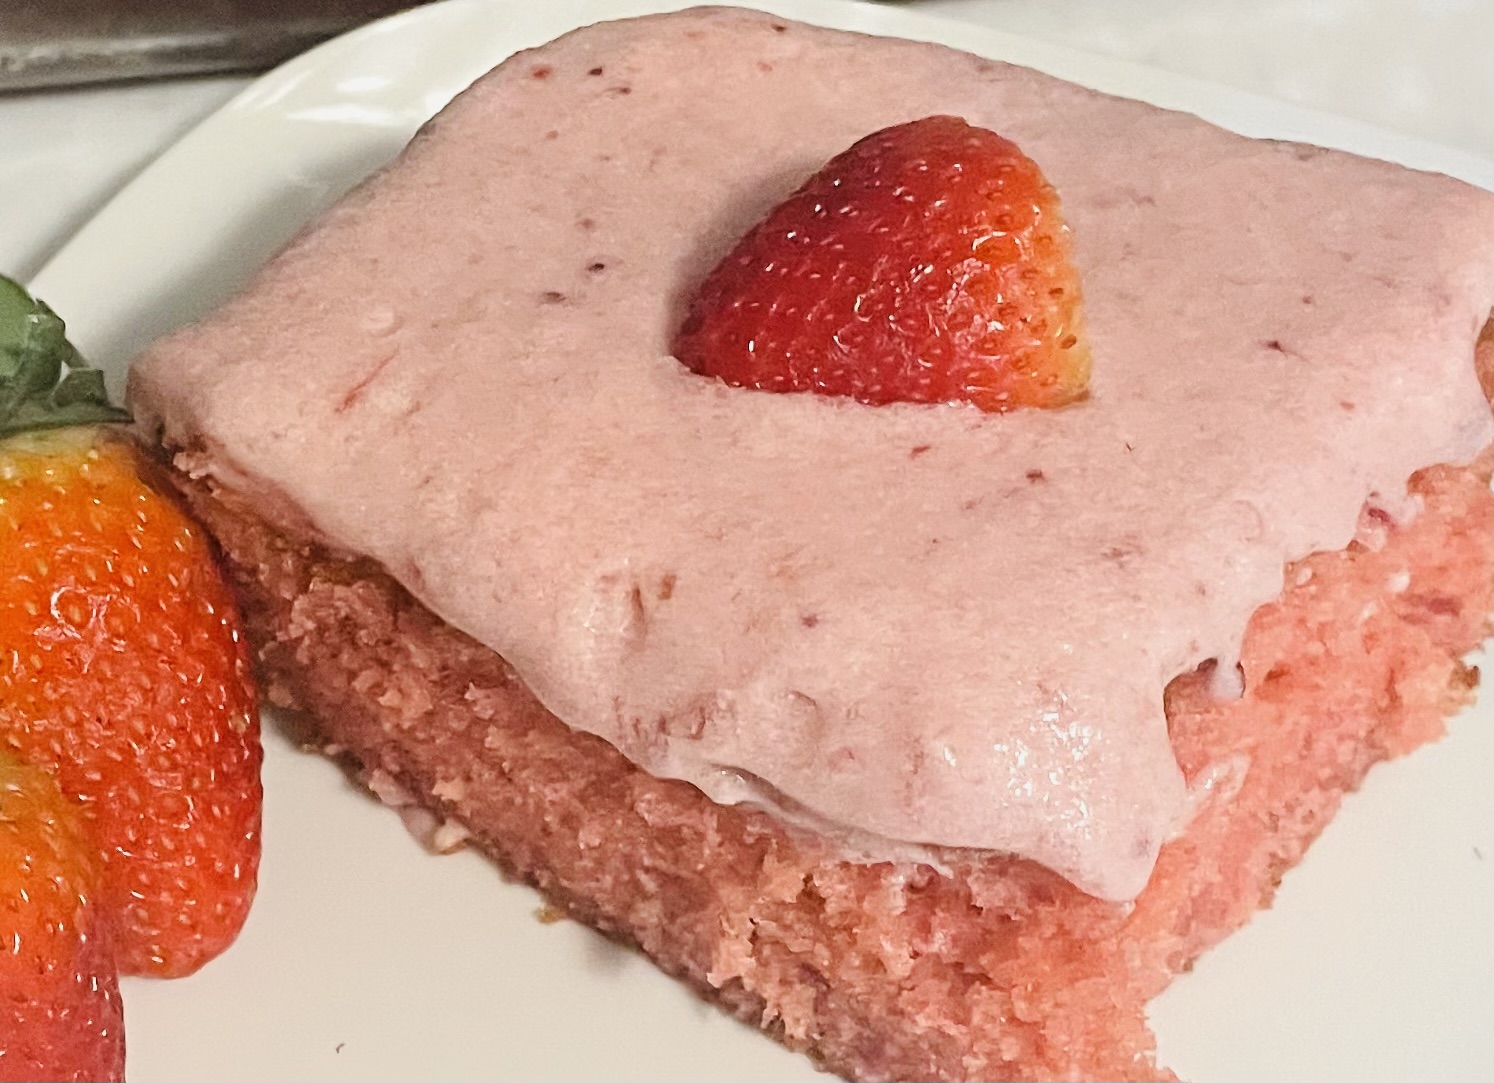 A Sensational Strawberry Cake Recipe That’s Sure to Please